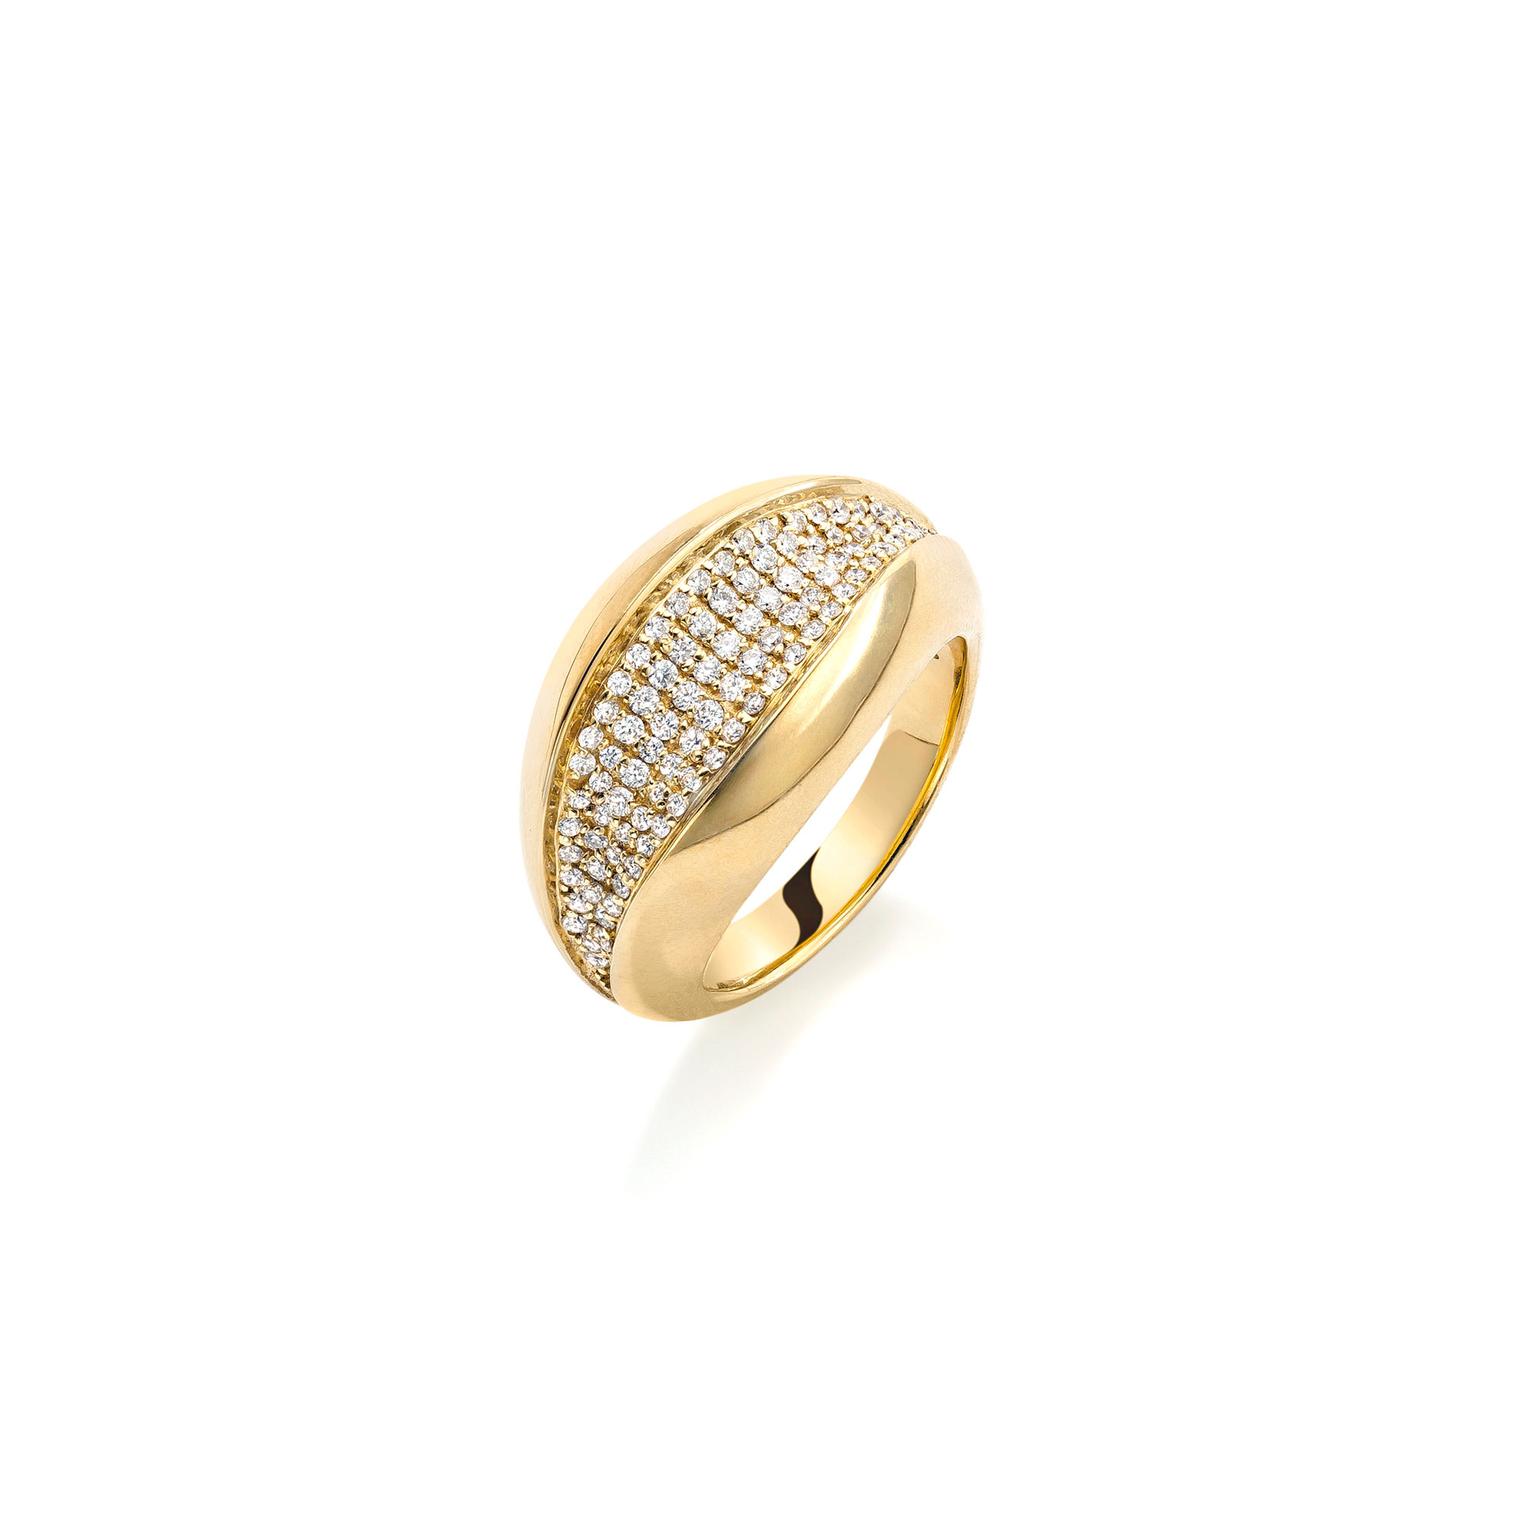 Mappin & Webb Wildfell yellow gold pavé ring